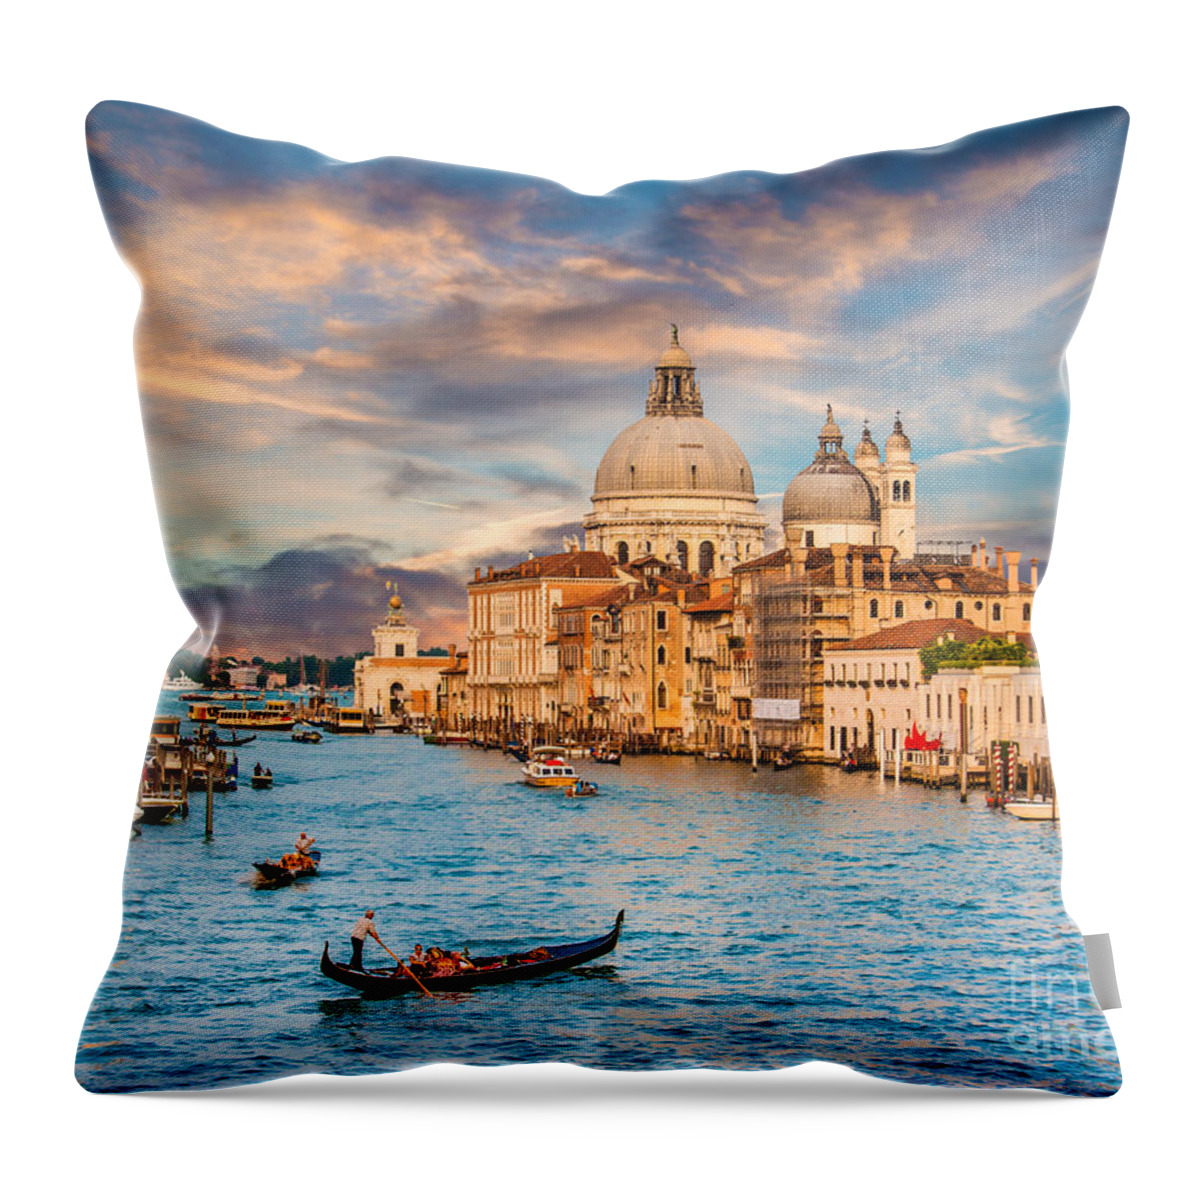 Adriatic Throw Pillow featuring the photograph Venice Sunset #8 by JR Photography